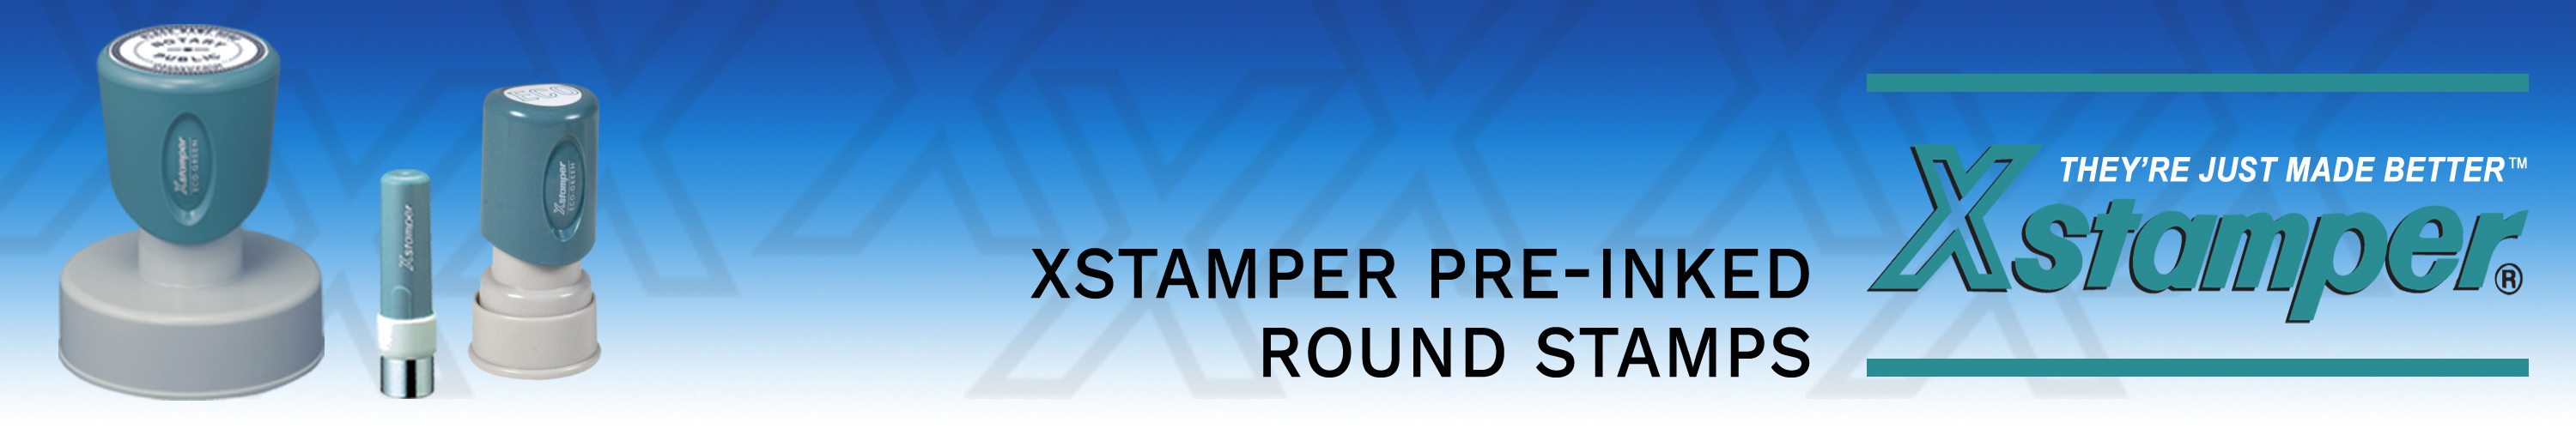 Xstamper Round Stamps Made and shipped daily. Free same day shipping. No sales tax - ever.